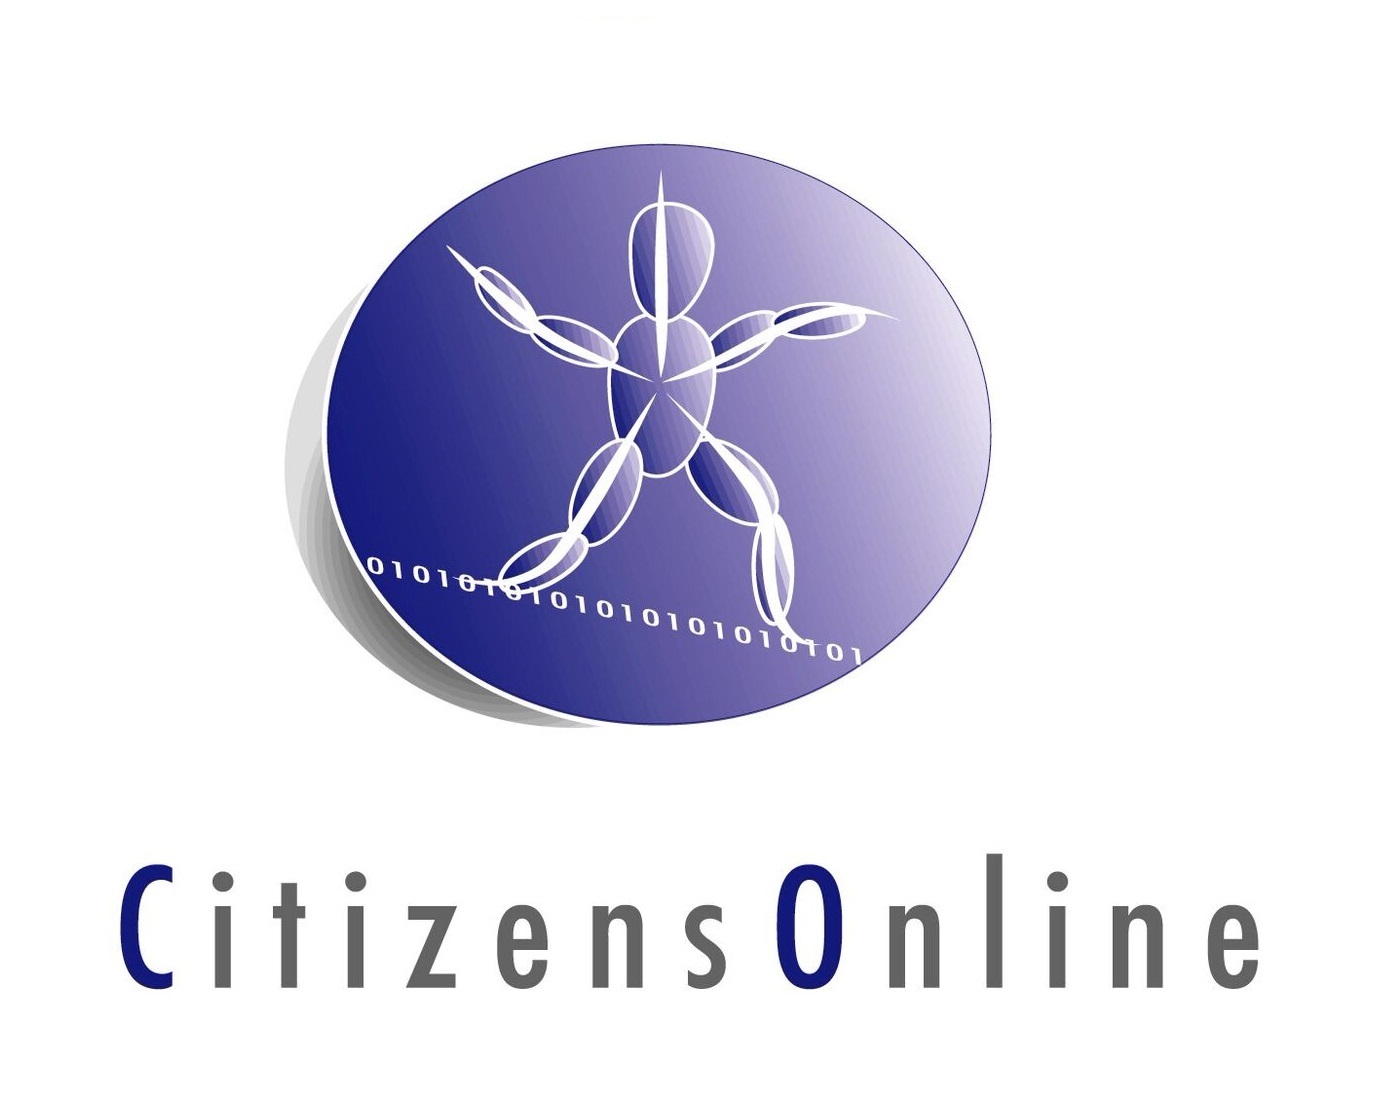 Celebrating 25 Years of Citizens Online